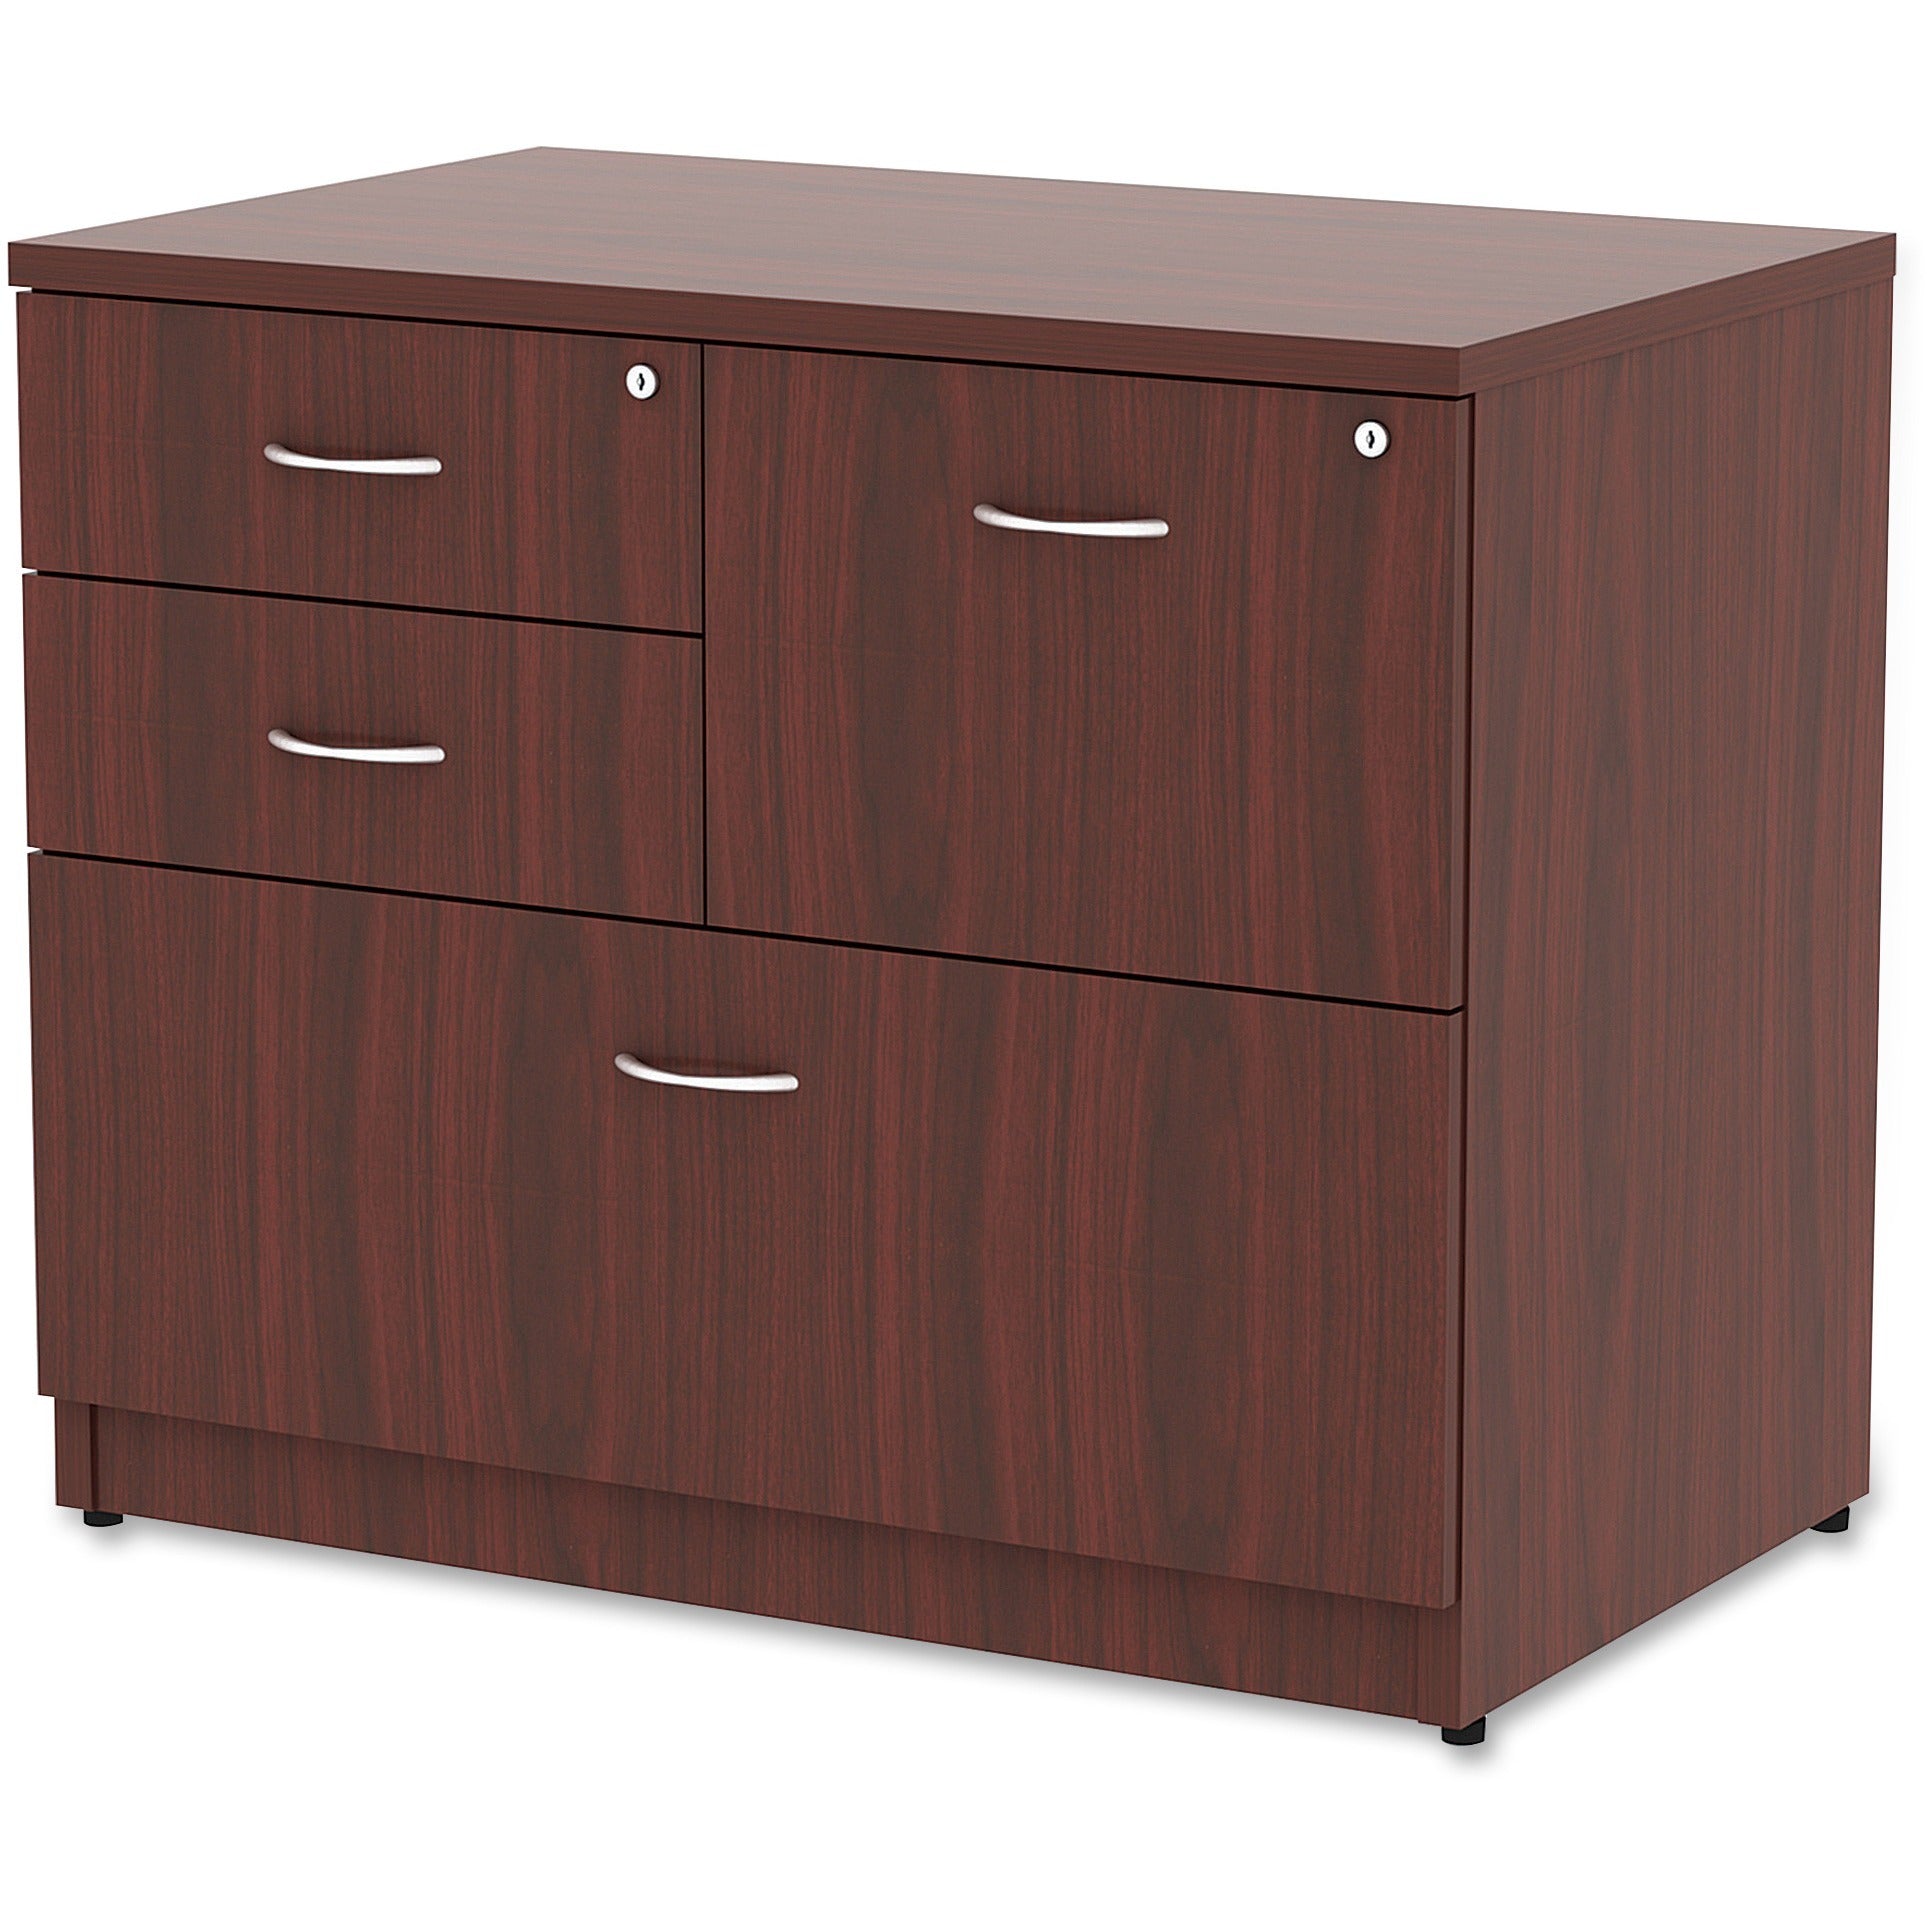 lorell-essentials-series-box-box-file-lateral-file-1-side-panel-01-edge-355-x-22295-lateral-file-4-x-box-file-drawers-mahogany-laminate-table-top-versatile-ball-bearing-glide-drawer-extension-security-lock-durable-adjustable_llr69541 - 3